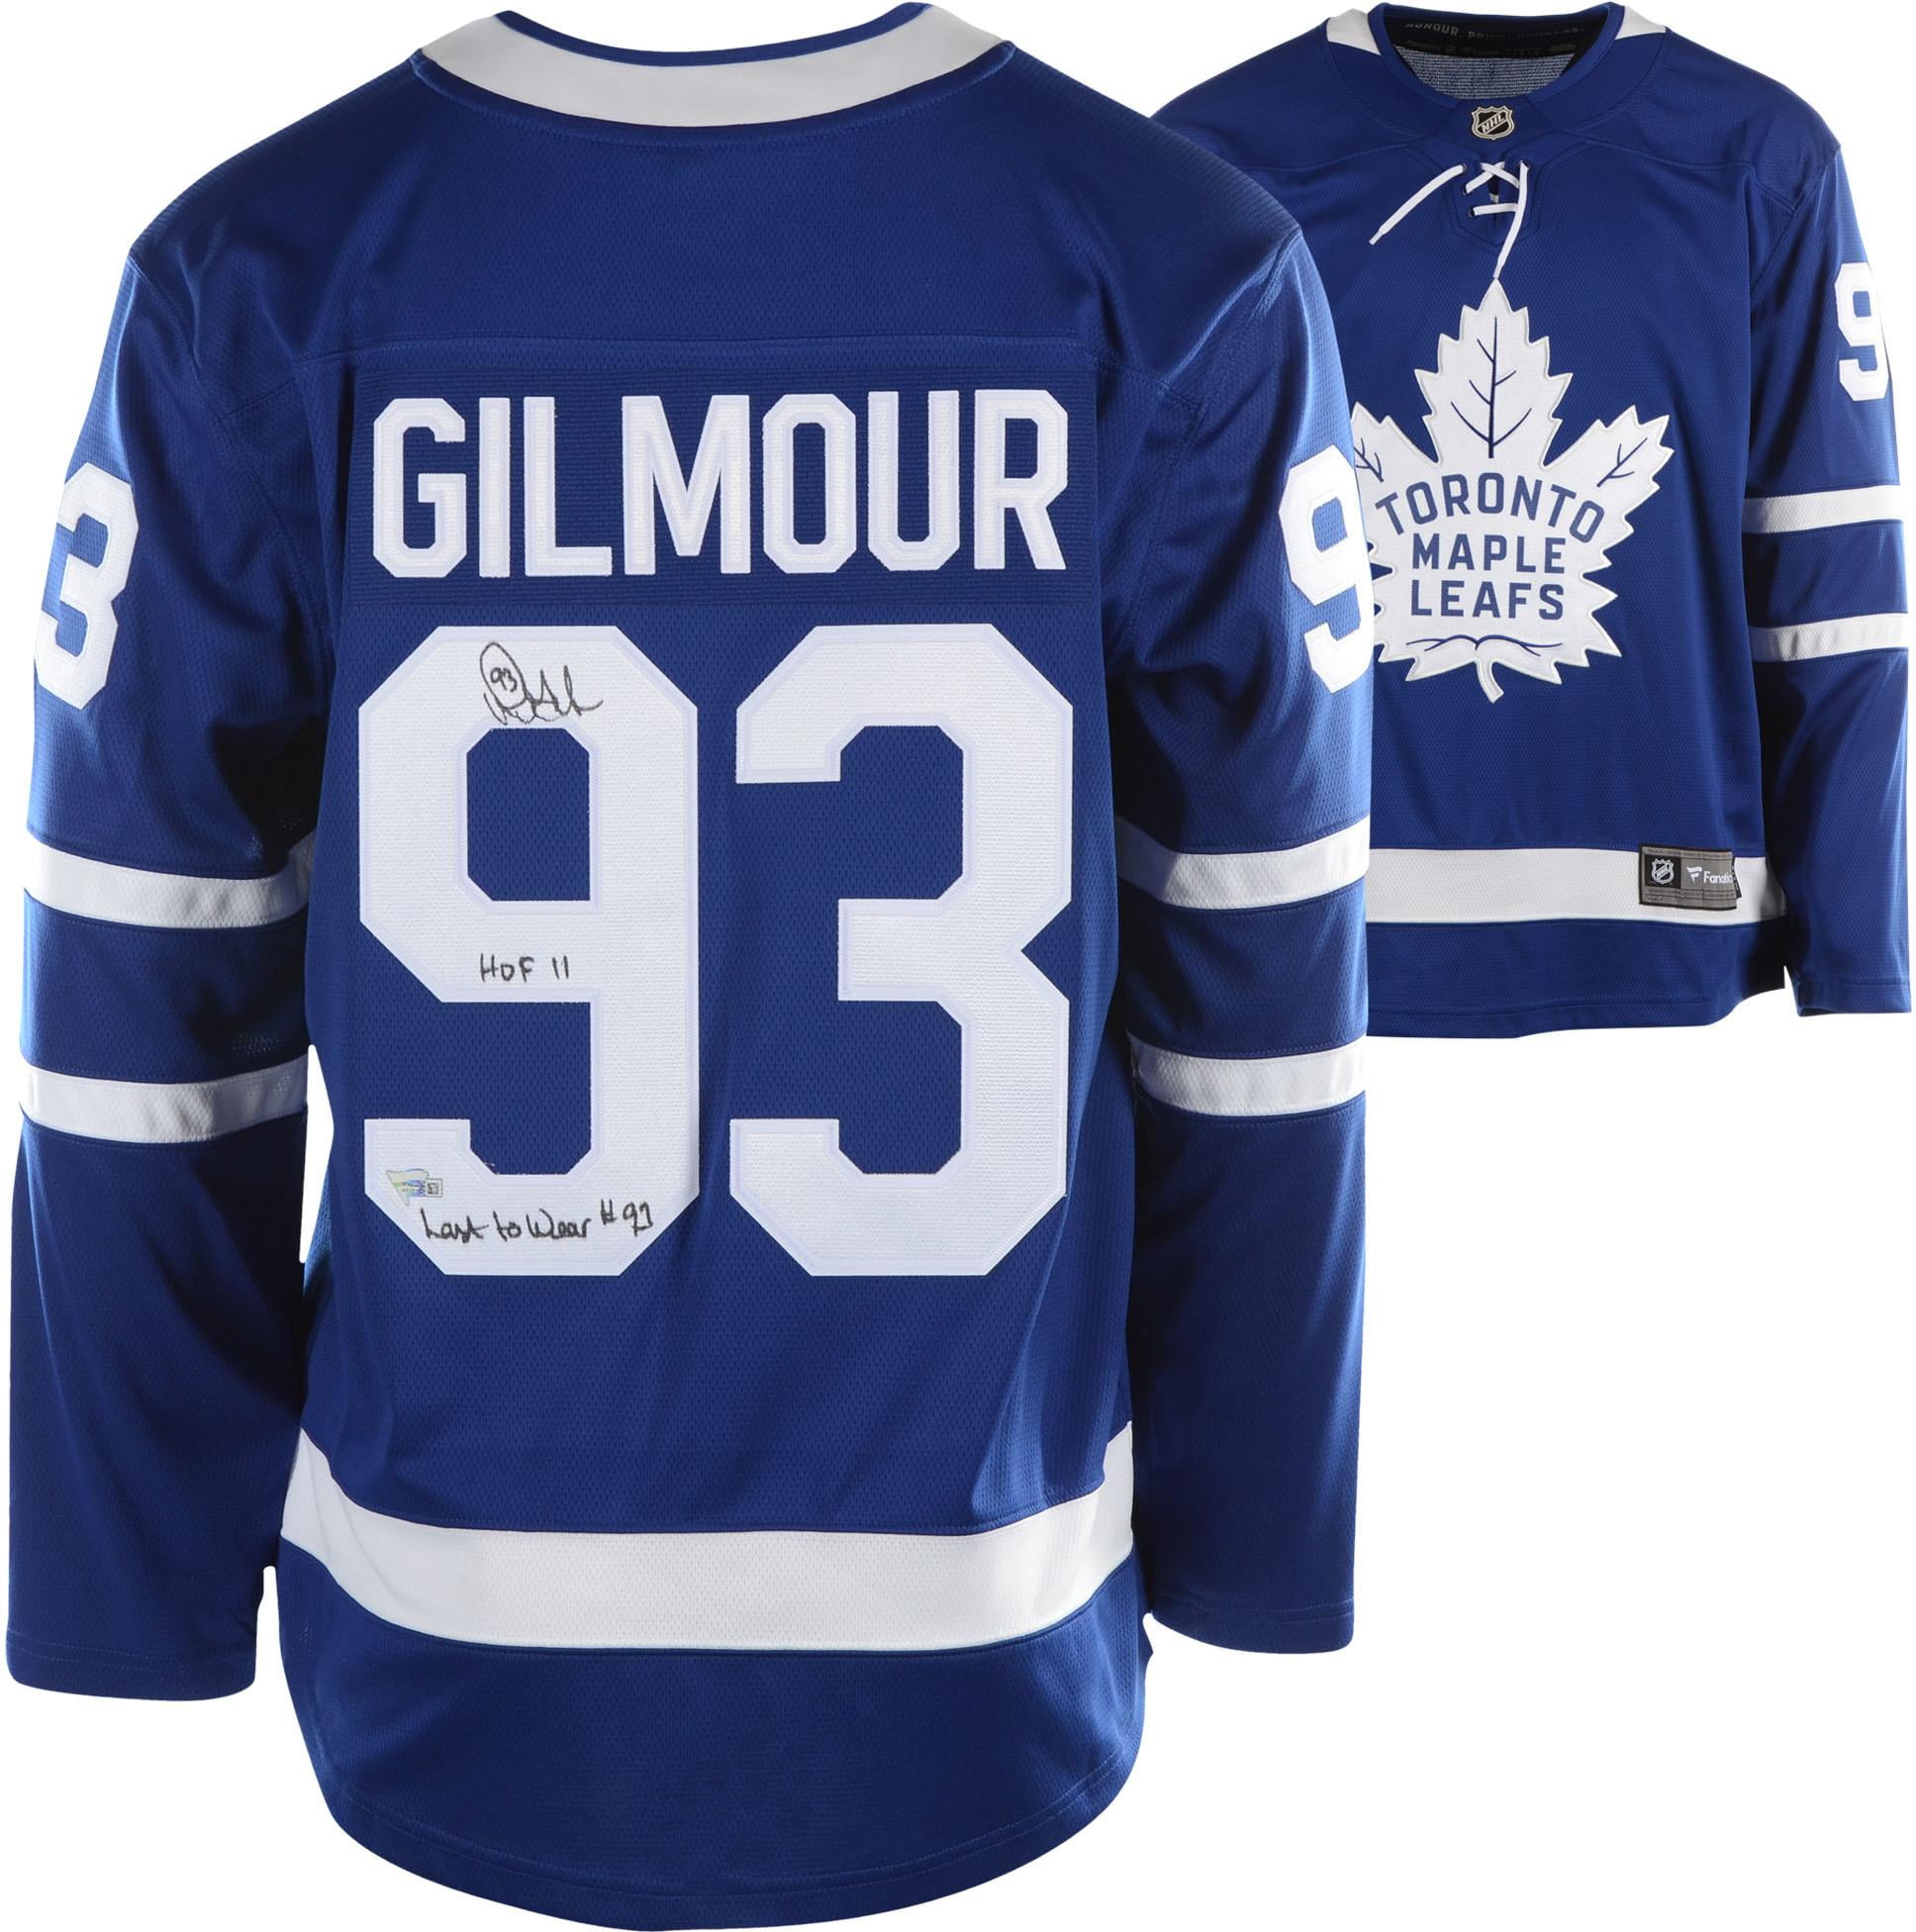 doug gilmour jersey number